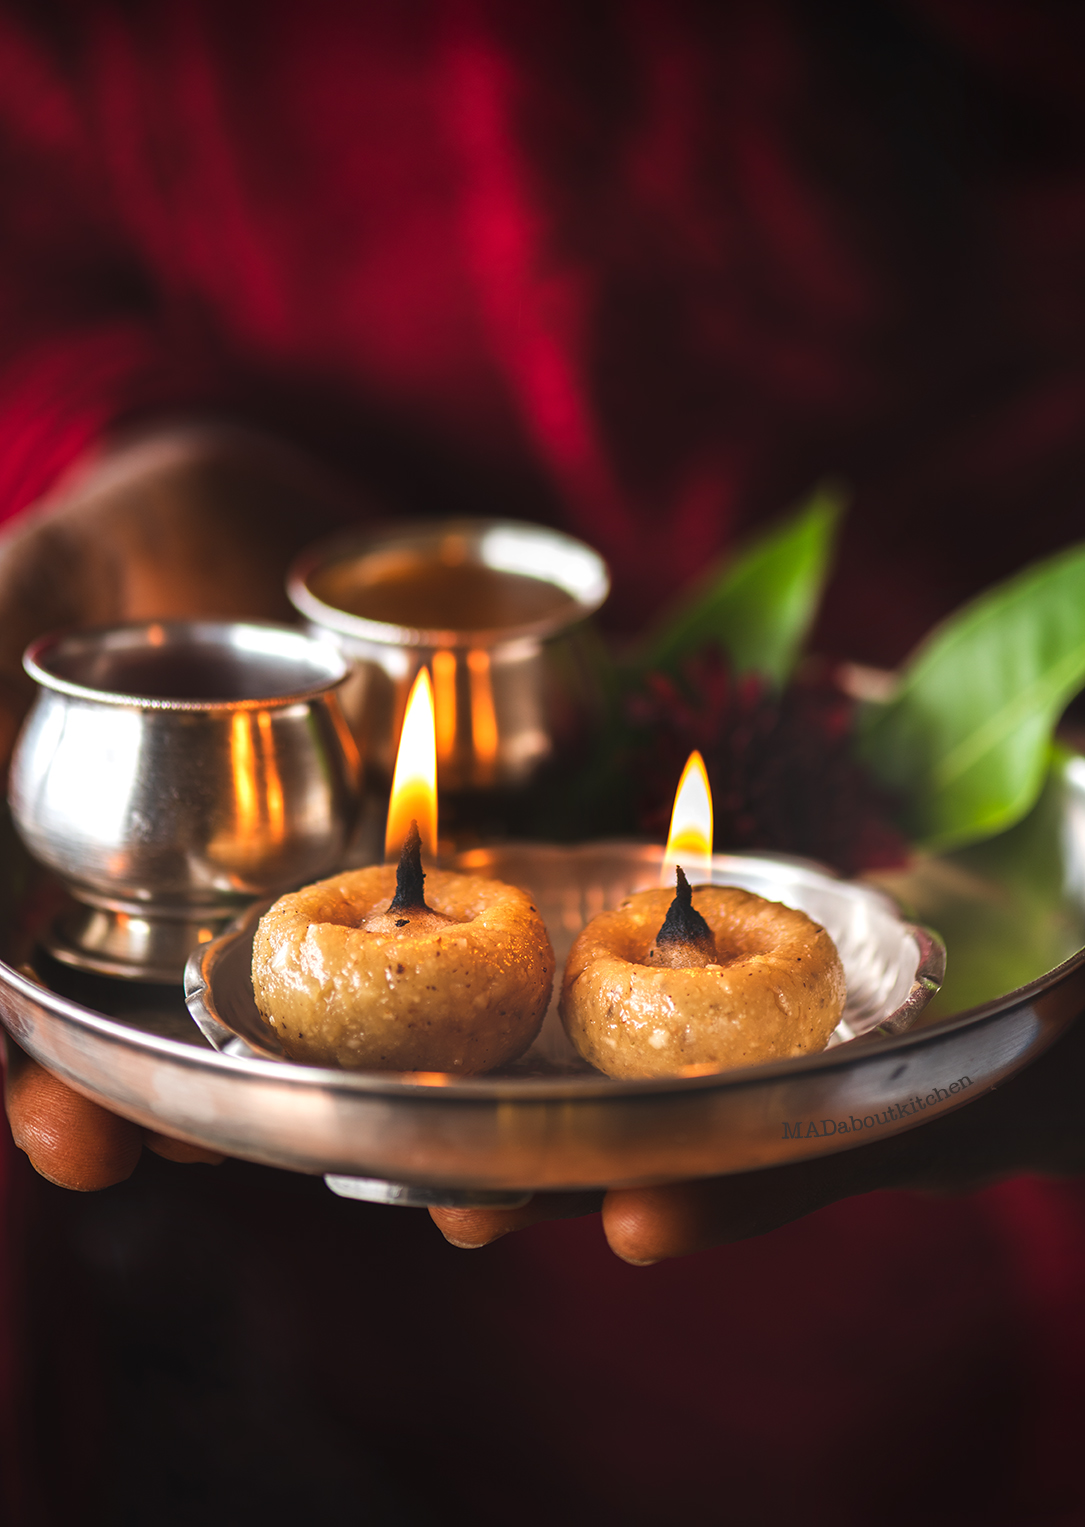 Tambittu or Akki tambittu is a rice preparation with jaggery and nuts and is offered to the god by making lamps out of them & are then served as prasada.